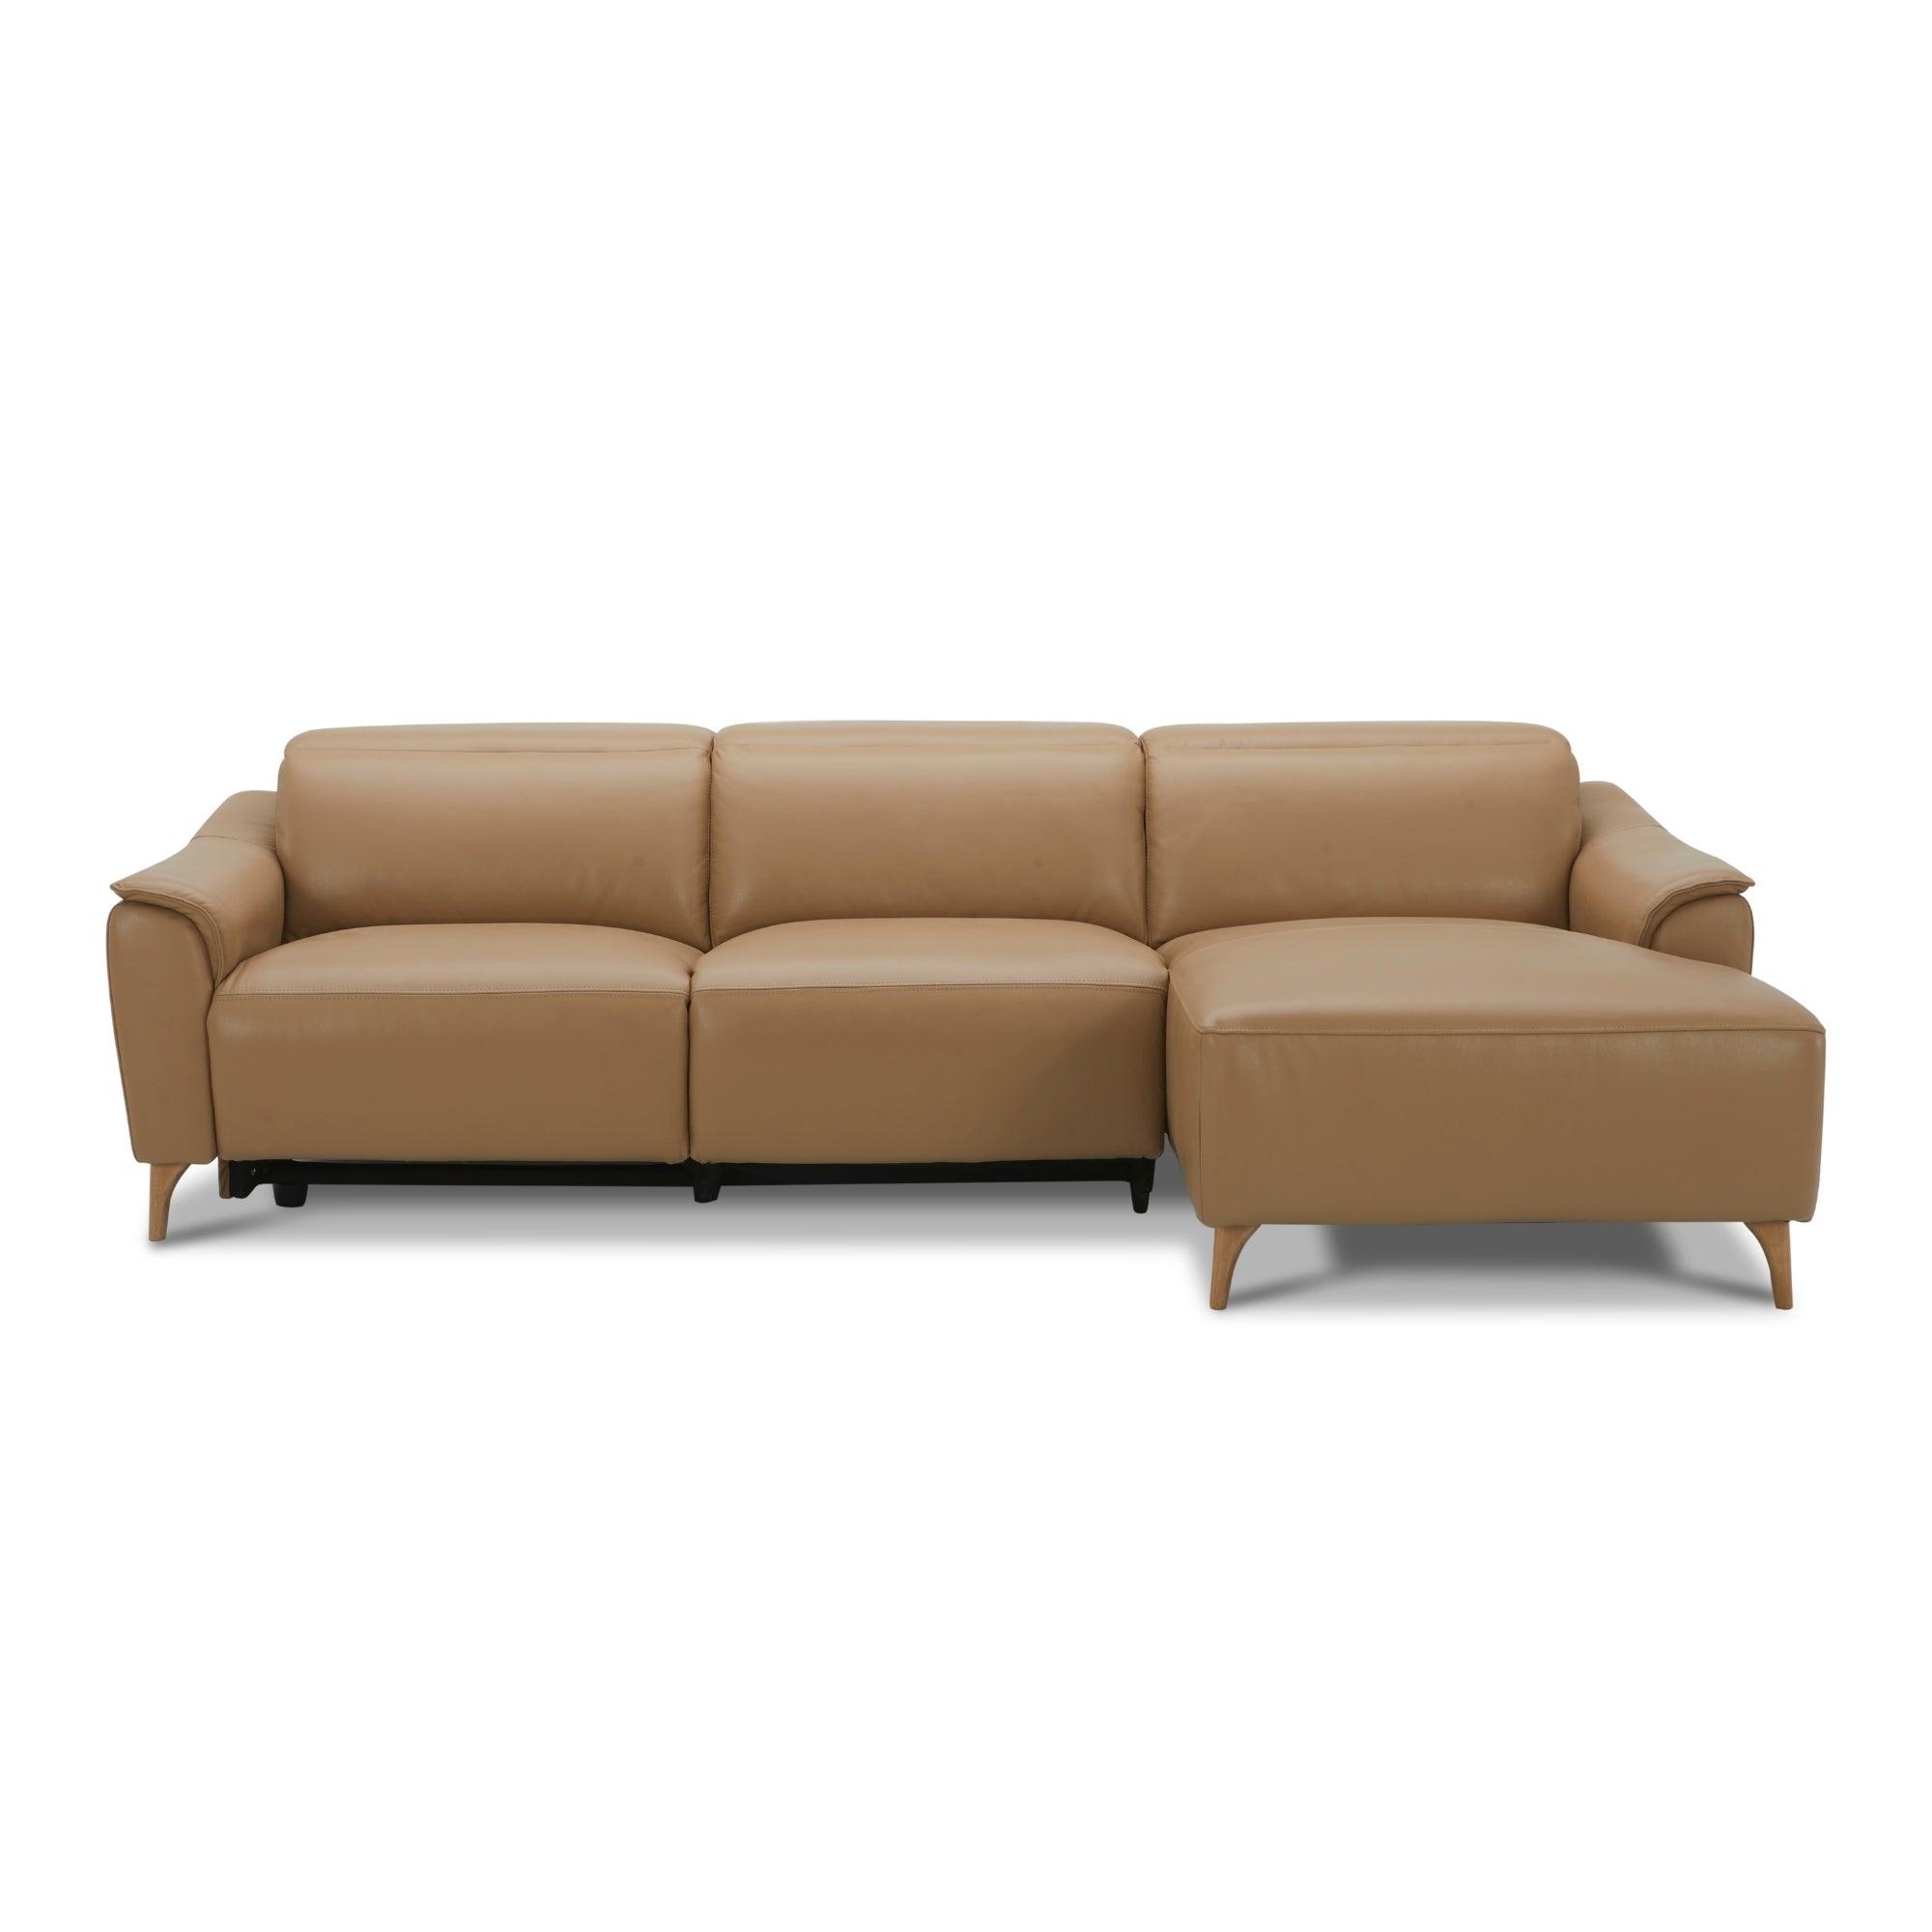 2 Seater Leather Recliner Sofa with Chaise, USB Port